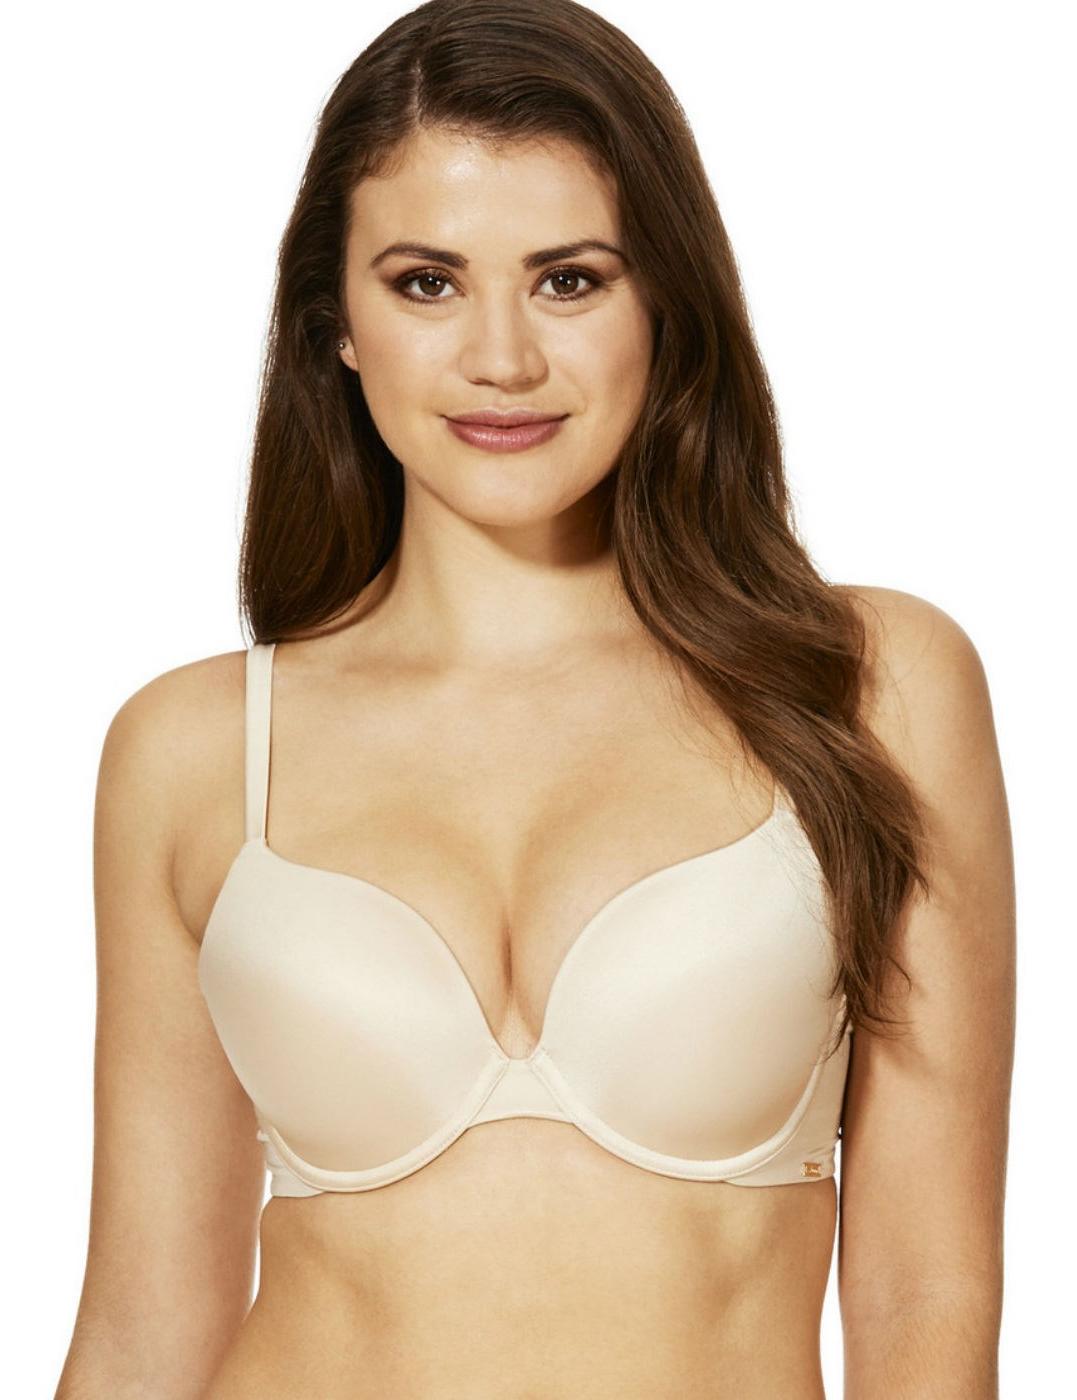 Off The Rack ~ Ultimo Bras are Ultimately Disappointing –